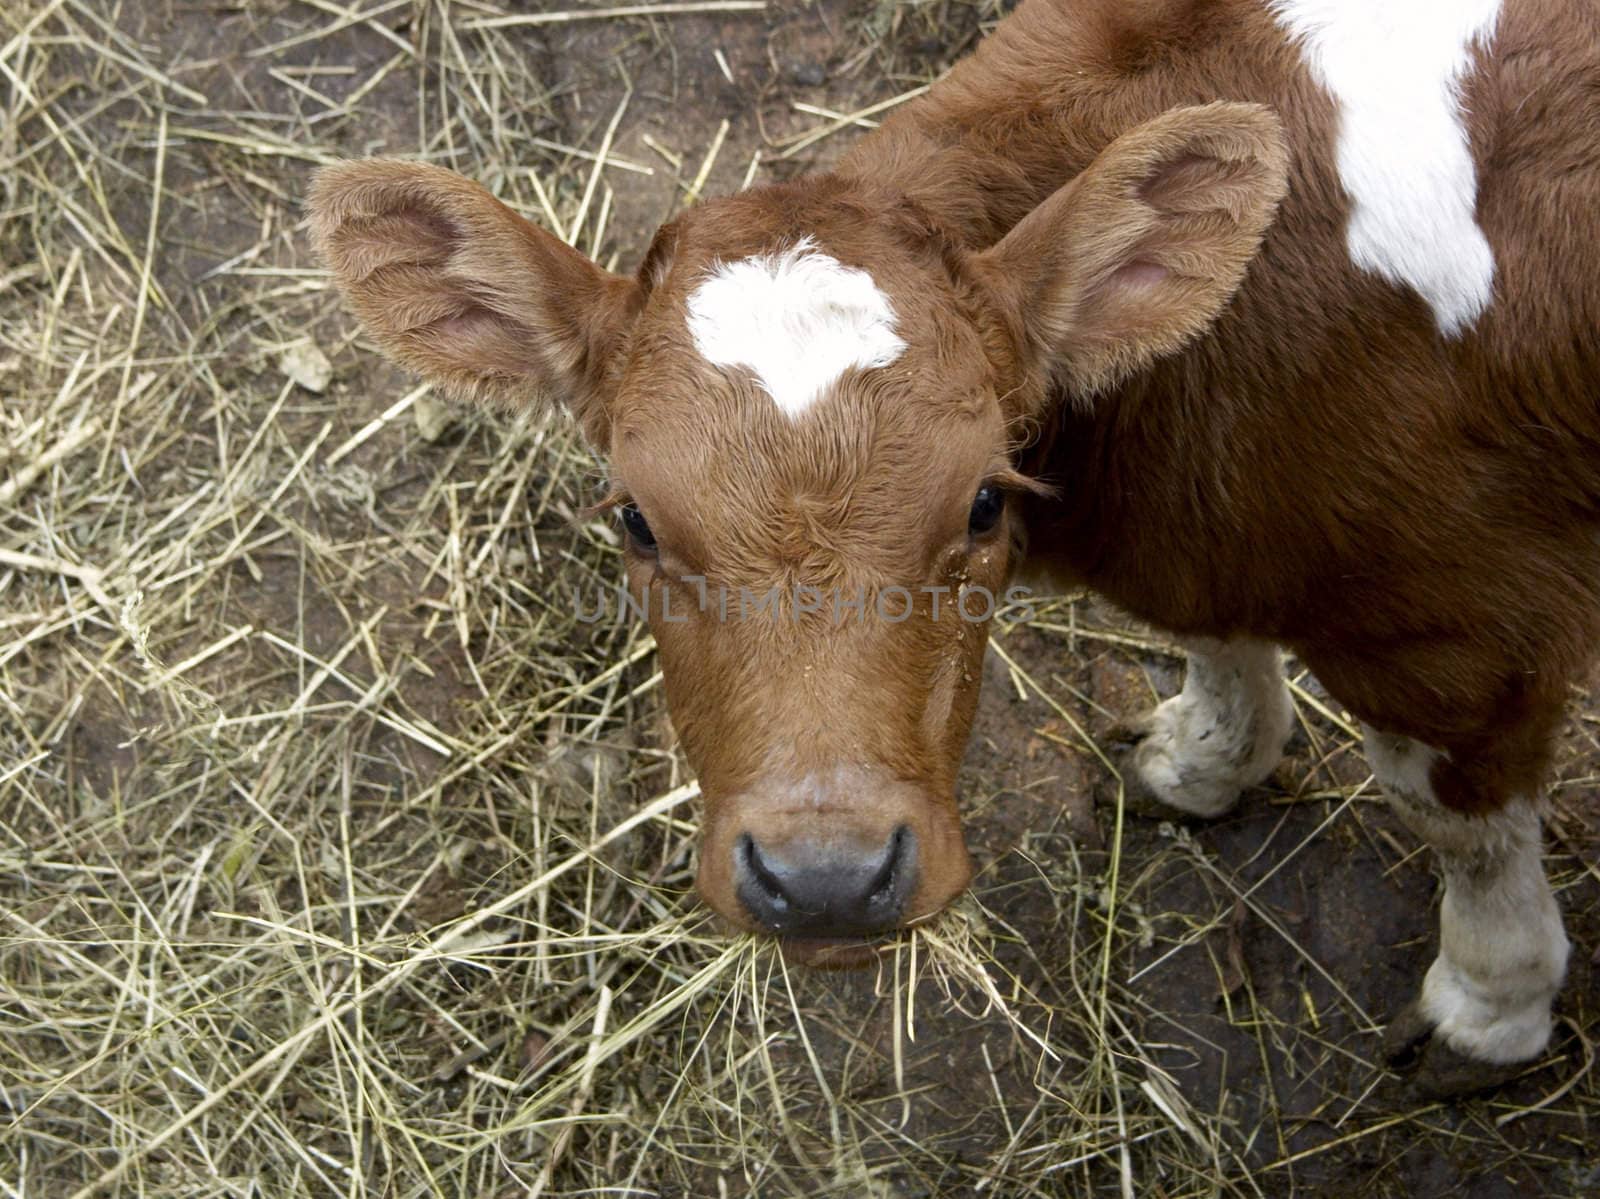 The image of the small cow chewing hay and looking in top